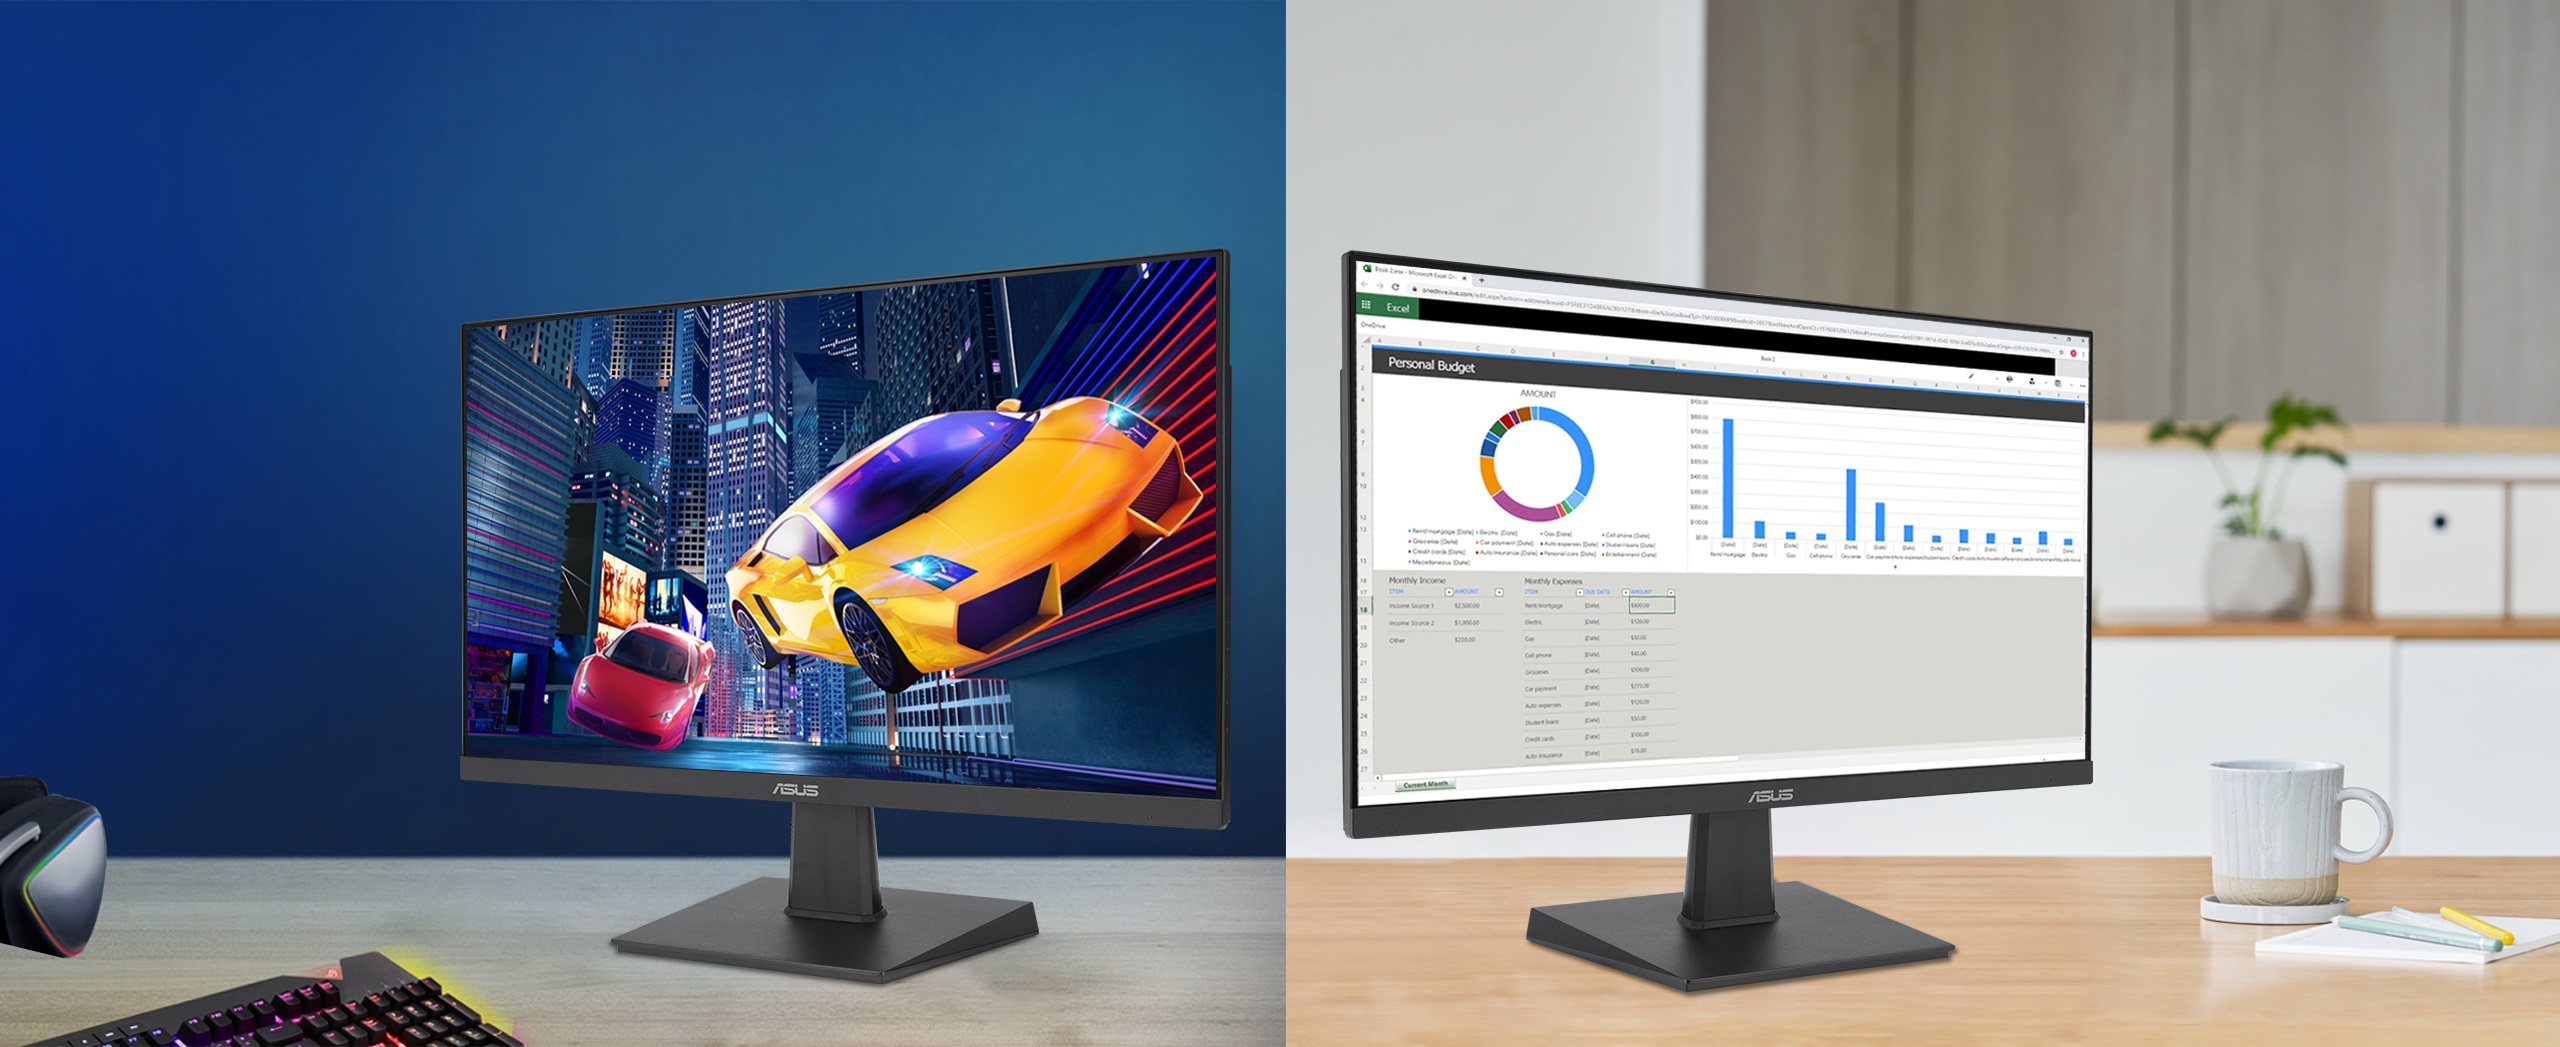 ASUS VA27EHFR is 27-inch IPS Eye Care Gaming monitor with fast 100Hz refresh rate and Adaptive-Sync technology to eliminate screen tearing and choppy frame rates for the smoother-than-ever experience.